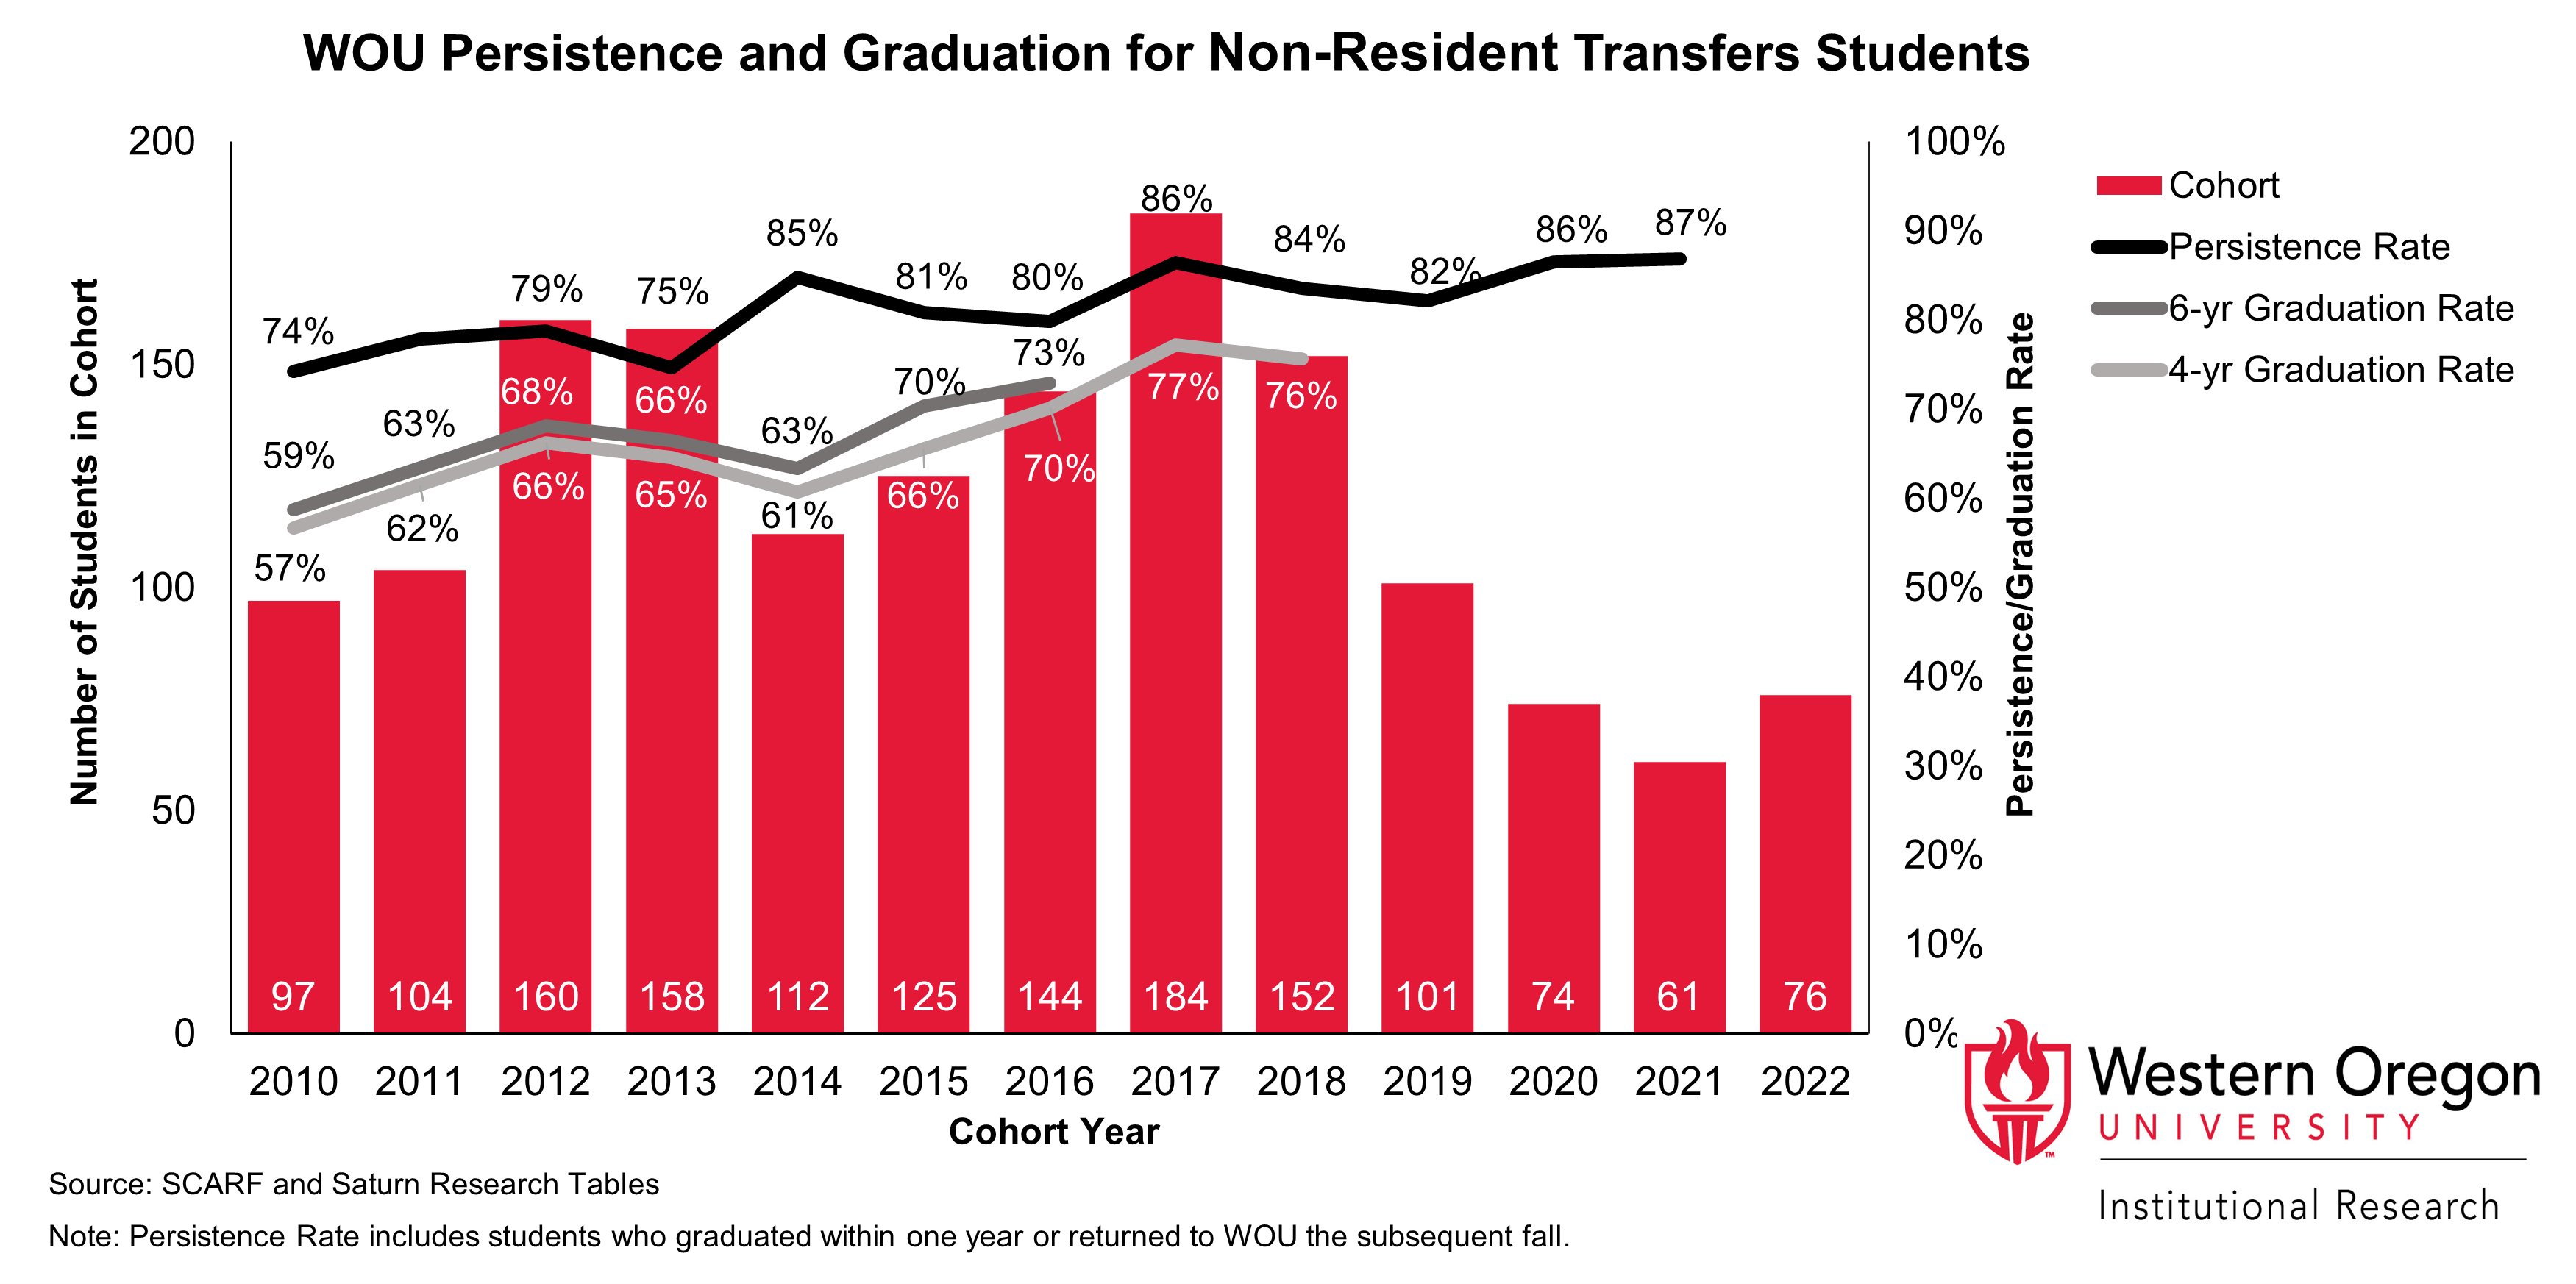 Bar and line graph of retention and 4- and 6-year graduation rates since 2010 for WOU transfer students that are not Oregon residents, showing that graduation rates and persistence rates have remained largely stable